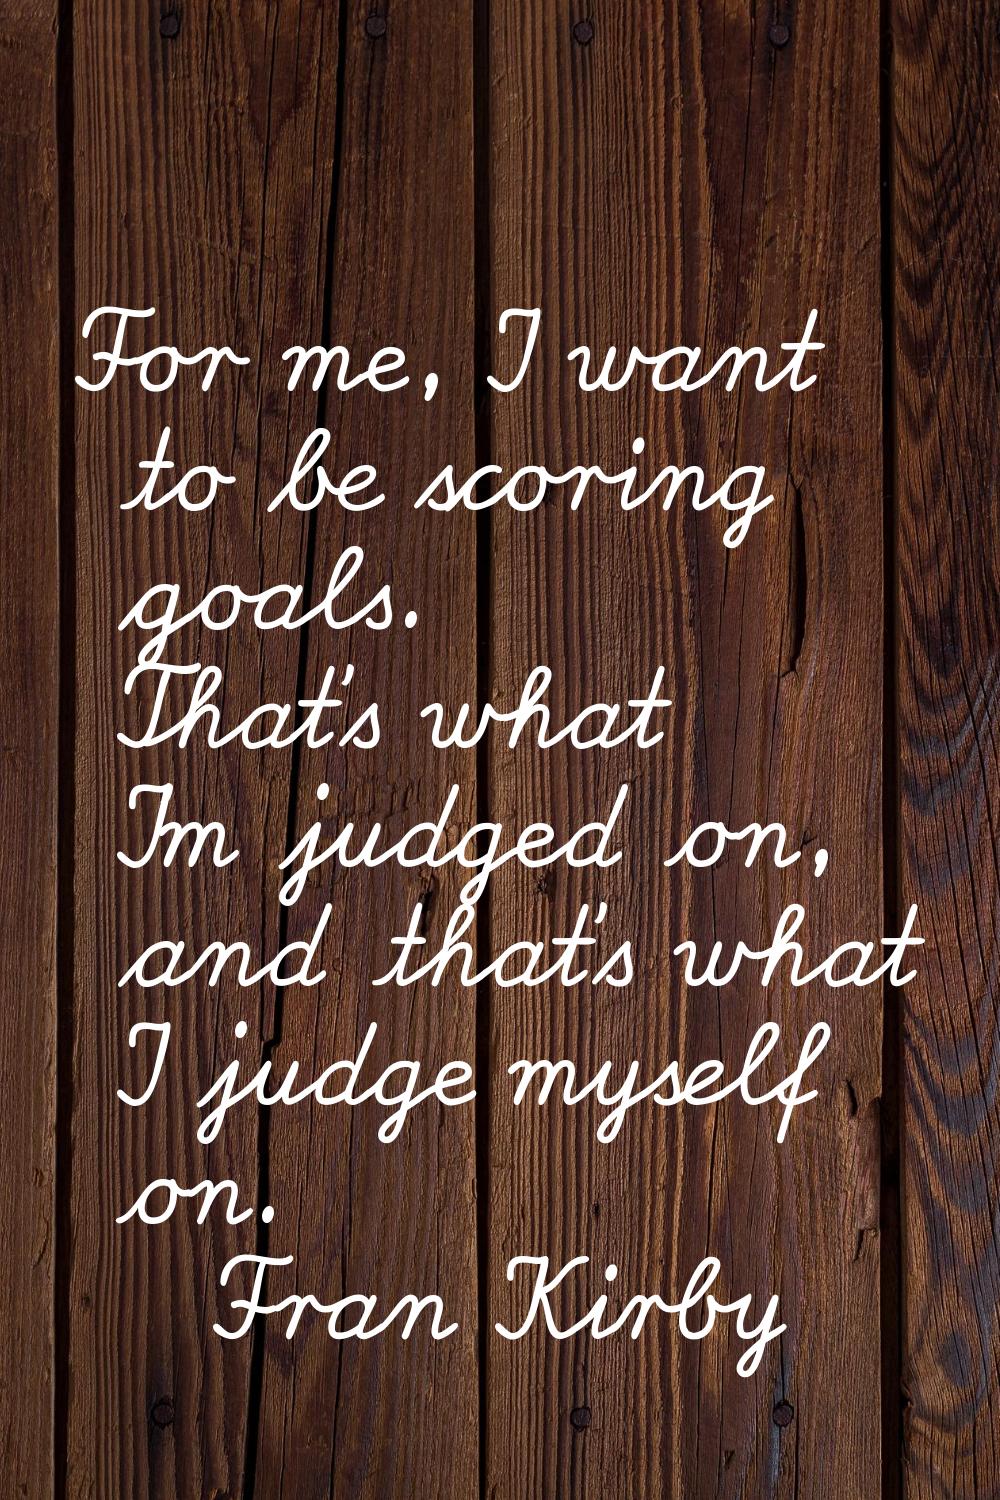 For me, I want to be scoring goals. That's what I'm judged on, and that's what I judge myself on.